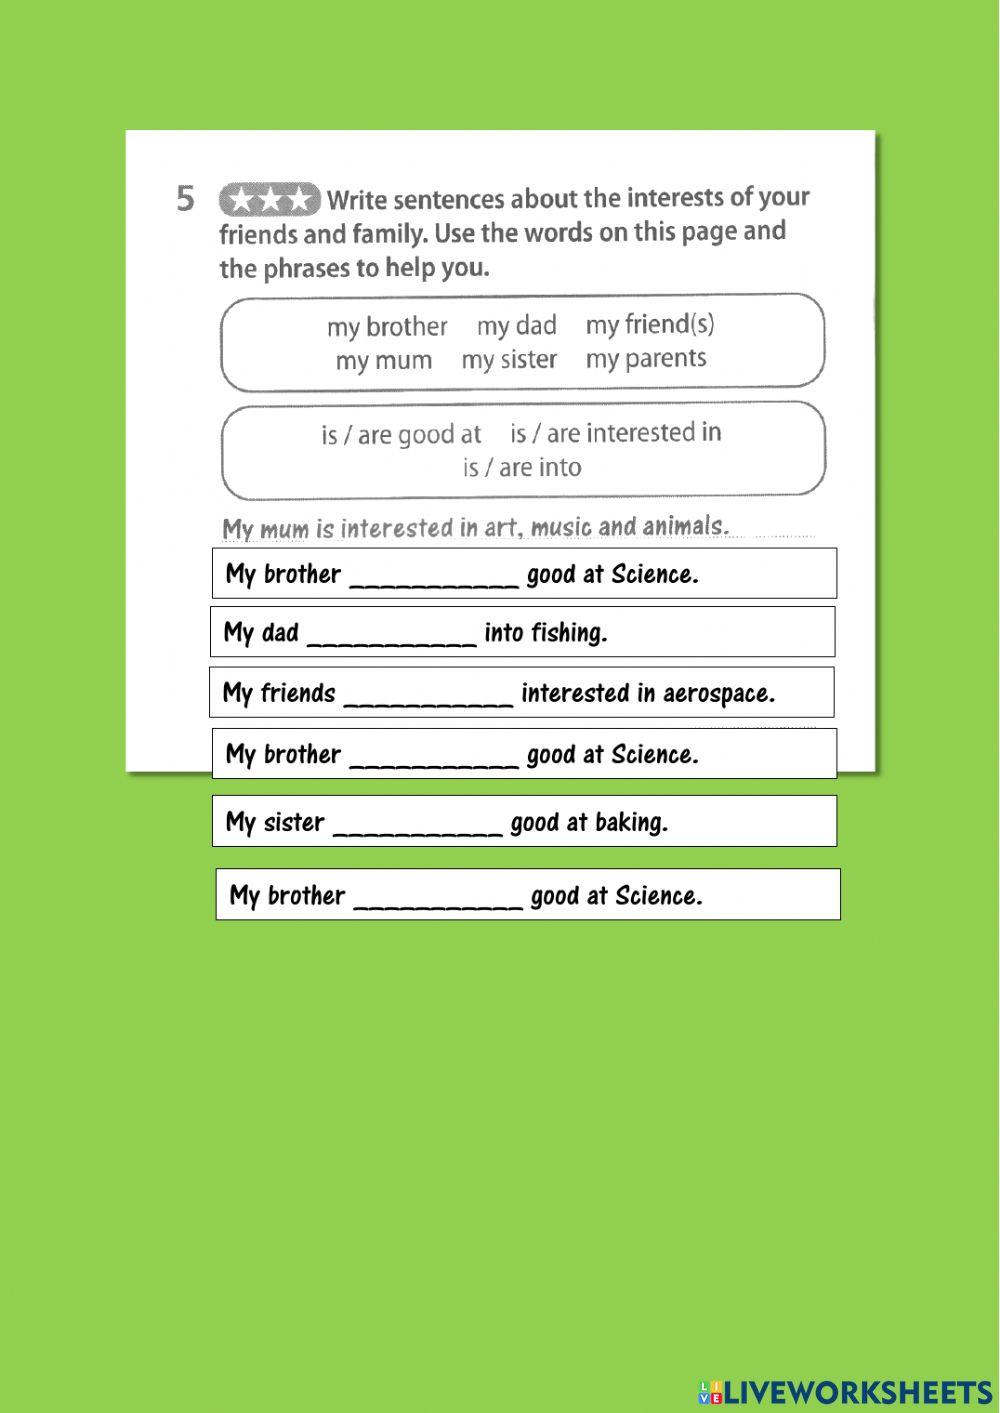 English year 5 cefr workbook  exercise 5 page 4